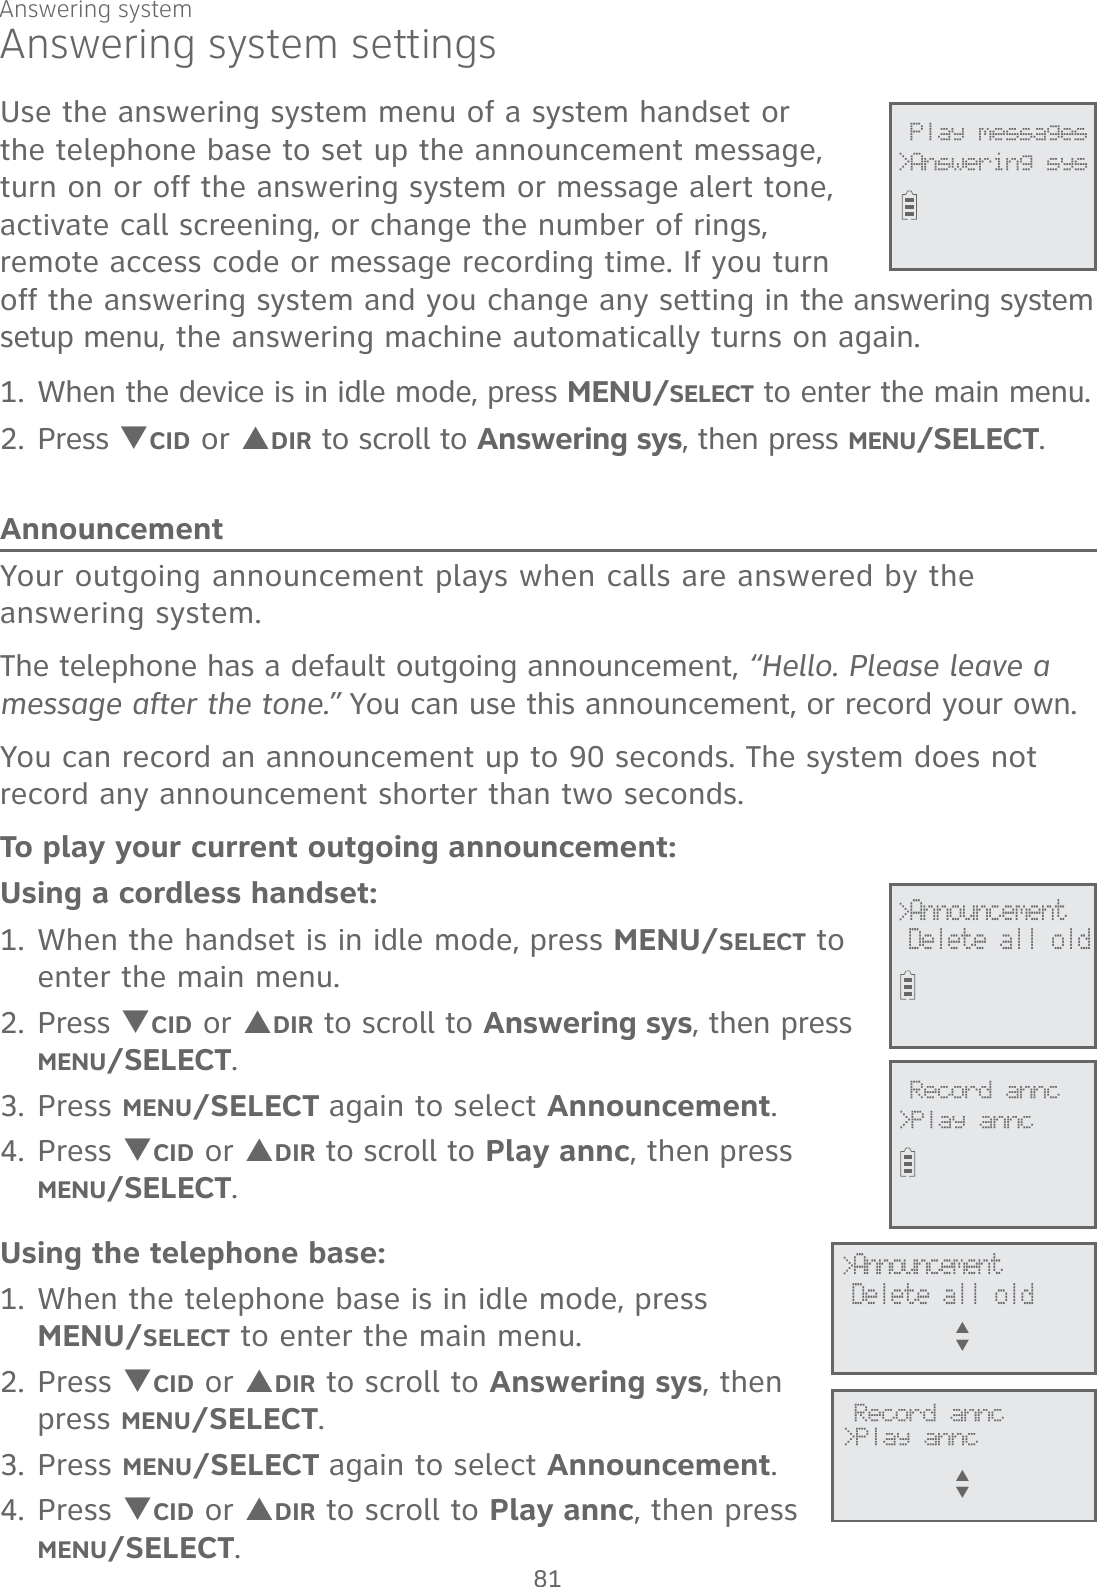 Answering system settingsUse the answering system menu of a system handset or the telephone base to set up the announcement message, turn on or off the answering system or message alert tone, activate call screening, or change the number of rings, remote access code or message recording time. If you turn off the answering system and you change any setting in the answering system setup menu, the answering machine automatically turns on again.1. When the device is in idle mode, press MENU/SELECT to enter the main menu.2. Press TCID or SDIR to scroll to Answering sys, then press MENU/SELECT.AnnouncementYour outgoing announcement plays when calls are answered by the answering system. The telephone has a default outgoing announcement, “Hello. Please leave a message after the tone.” You can use this announcement, or record your own. You can record an announcement up to 90 seconds. The system does not record any announcement shorter than two seconds.To play your current outgoing announcement:Using a cordless handset:1. When the handset is in idle mode, press MENU/SELECT to enter the main menu.2. Press TCID or SDIR to scroll to Answering sys, then press MENU/SELECT.3.  Press MENU/SELECT again to select Announcement. 4. Press TCID or SDIR to scroll to Play annc, then press  MENU/SELECT.  Using the telephone base:1. When the telephone base is in idle mode, press  MENU/SELECT to enter the main menu.2. Press TCID or SDIR to scroll to Answering sys, then press MENU/SELECT.3.  Press MENU/SELECT again to select Announcement. 4. Press TCID or SDIR to scroll to Play annc, then press MENU/SELECT.              Play messages&gt;Answering sys&gt;AnnouncementDelete all old              Record annc&gt;Play annc              Record annc&gt;Play anncS      T             &gt;Announcement Delete all oldS      TAnswering system81